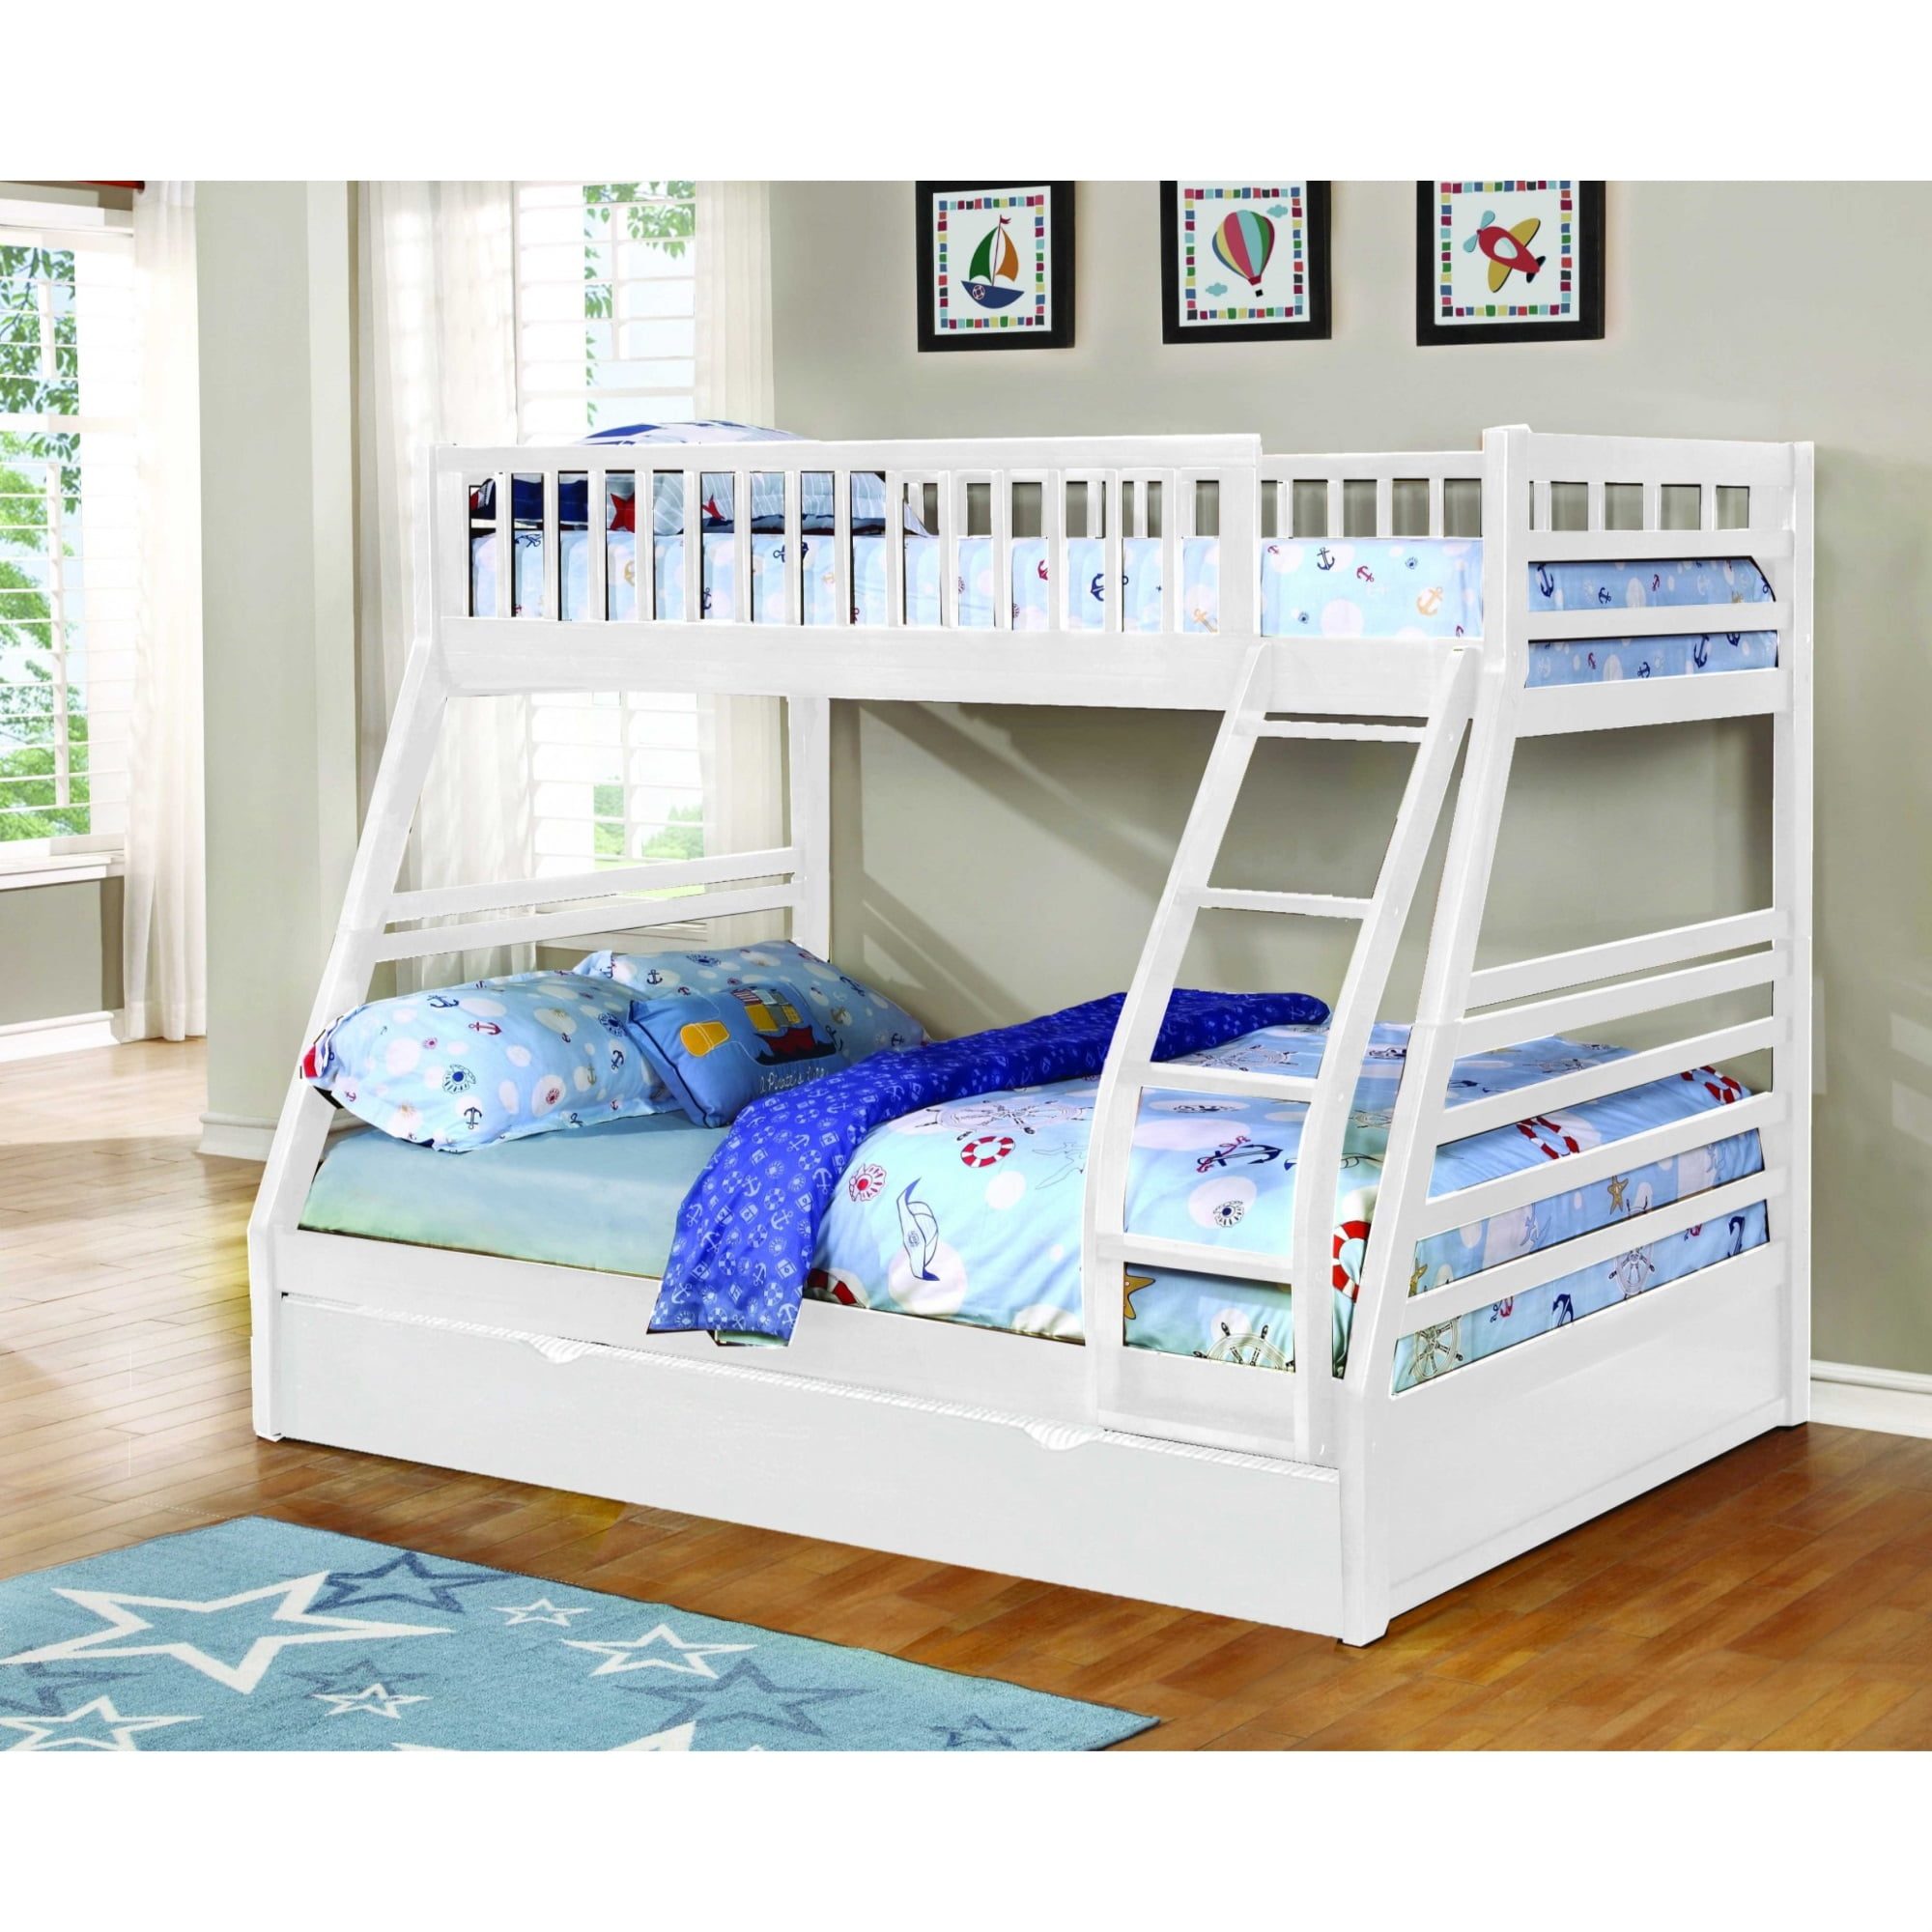 Solid Wood Twin, Used Solid Wood Bunk Beds